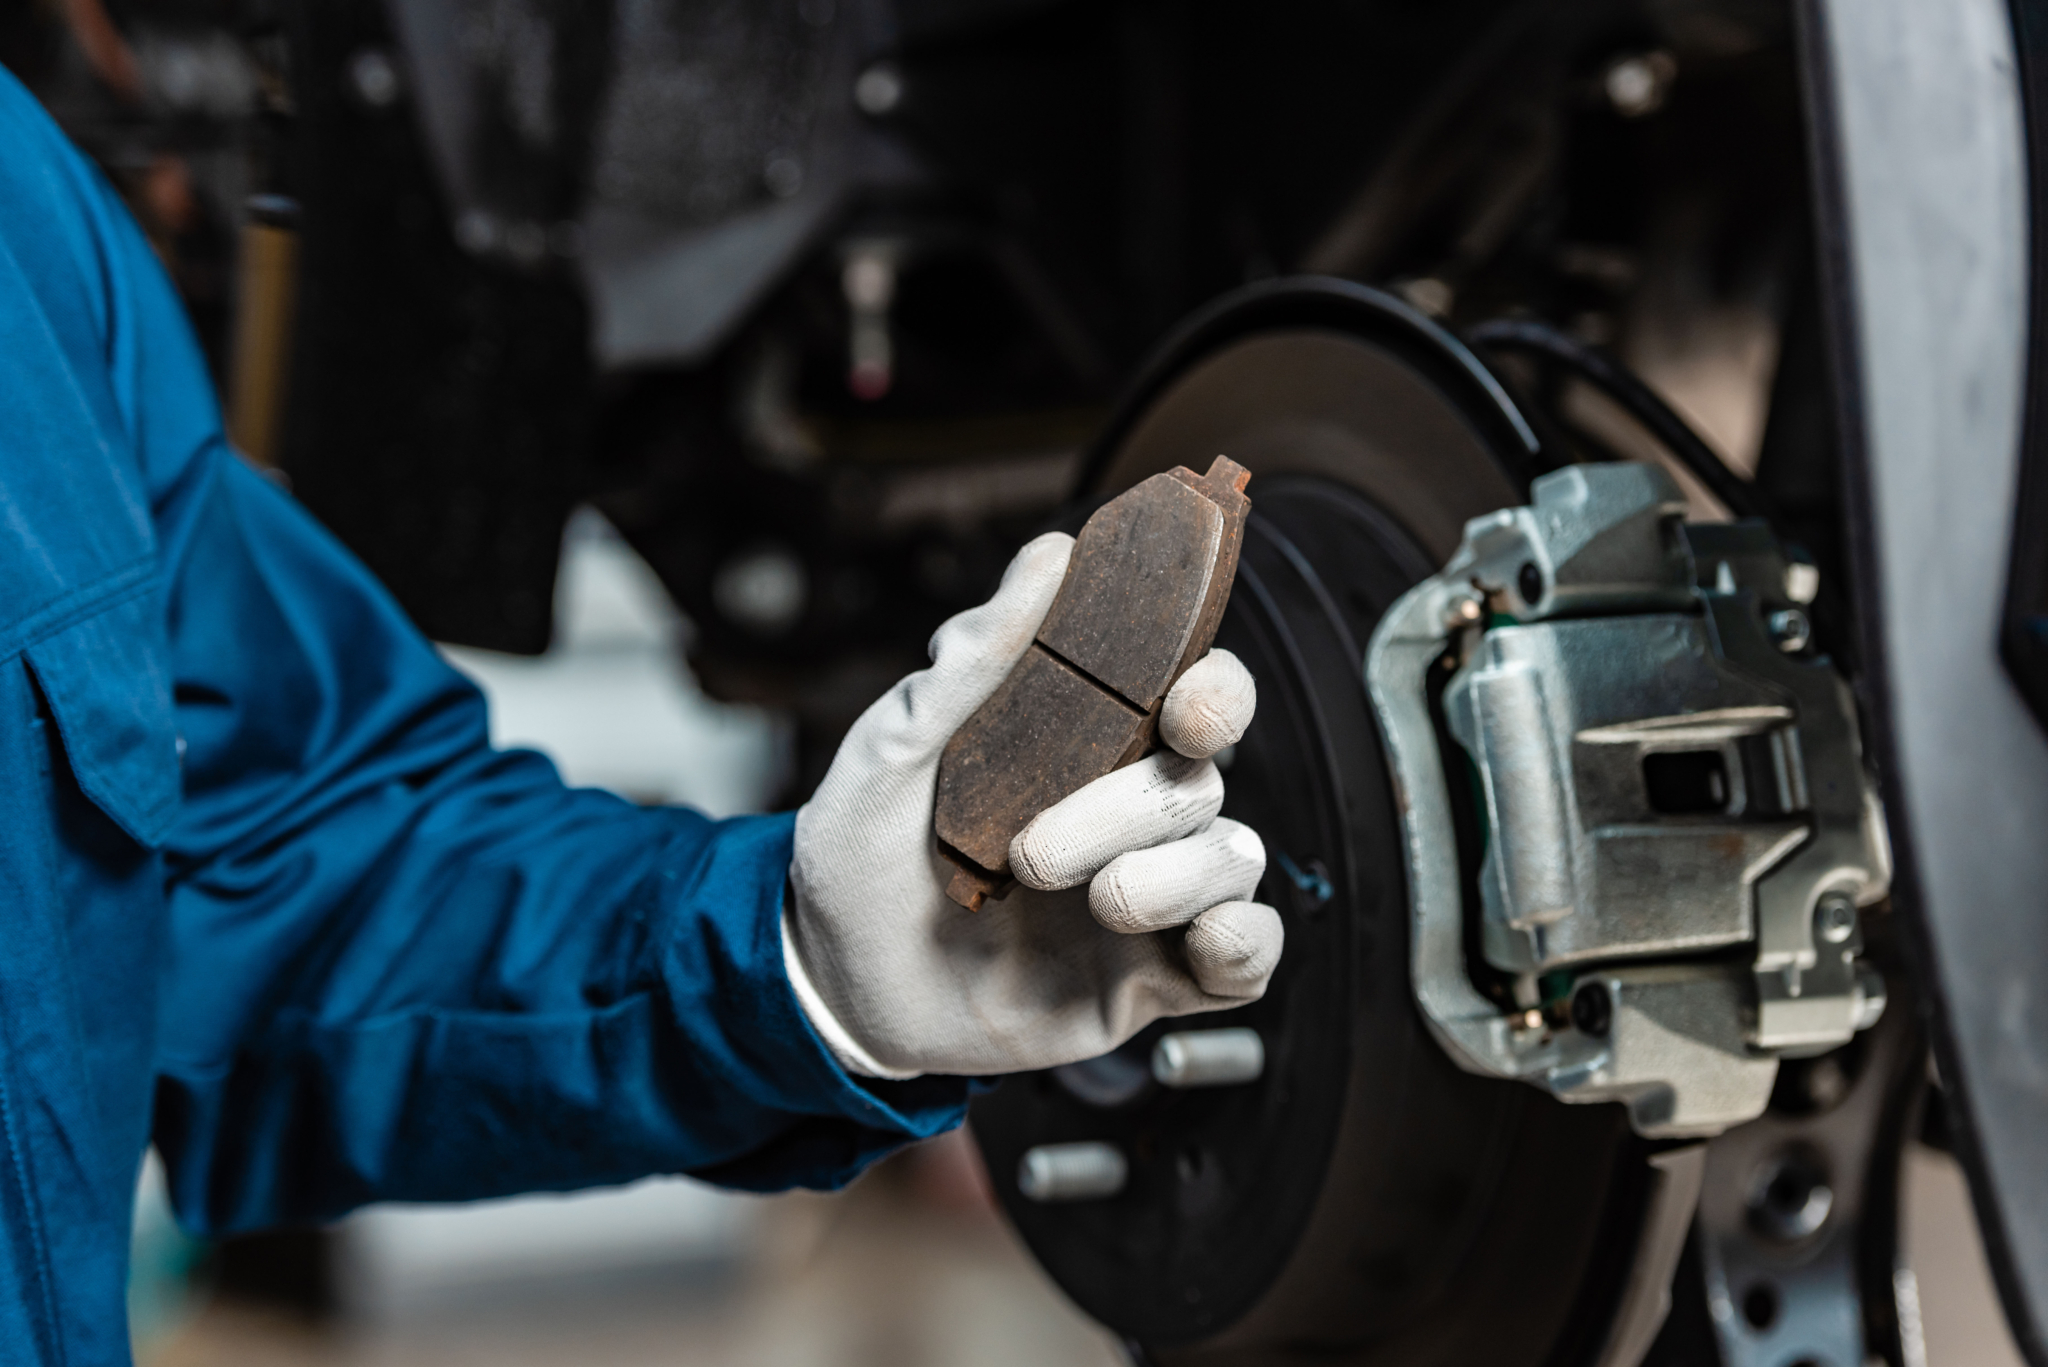 3 of 8 brake pads tested failed to meet R90 standards – DVSA